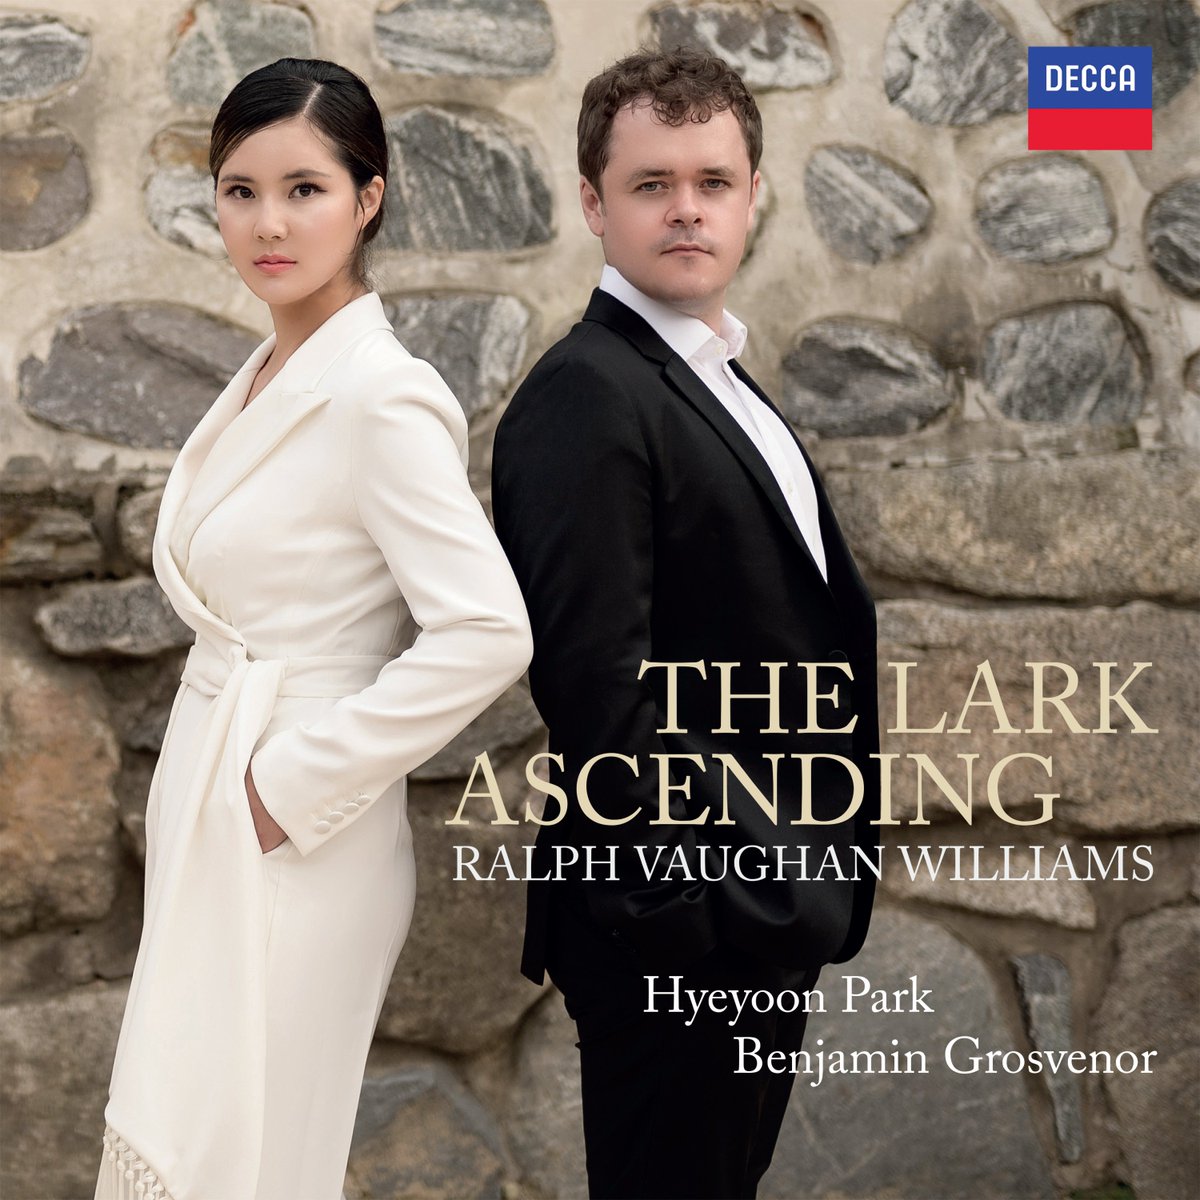 To celebrate the 150th anniversary of Ralph Vaughan Williams’ birth (12th October), @hyeyoon_park and @grosvenorpiano have today released a new version of the original arrangement of The Lark Ascending for solo violin and piano. Listen: grosvenorandpark.lnk.to/LarkAscendingTW